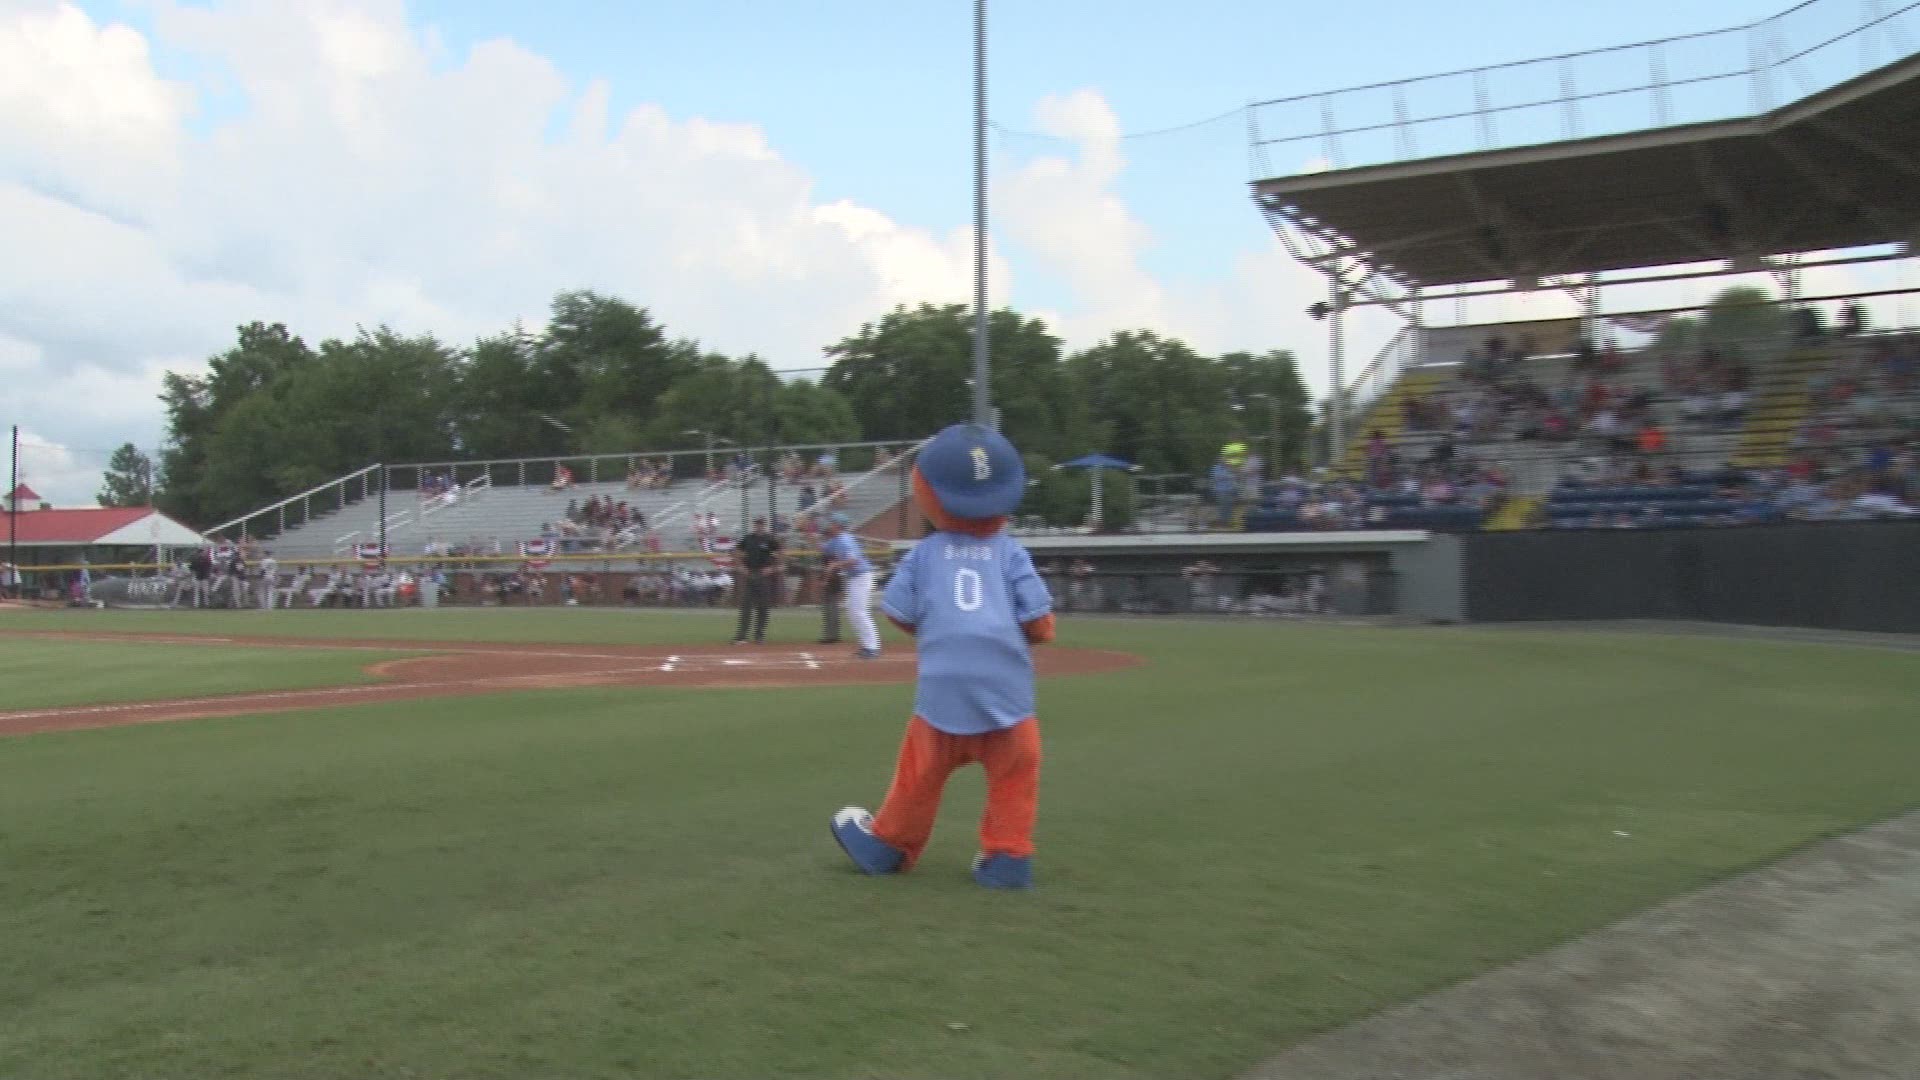 Our very own sports reporter Luke Lyddon threw the first pitch at the Burlington Royals game Saturday.